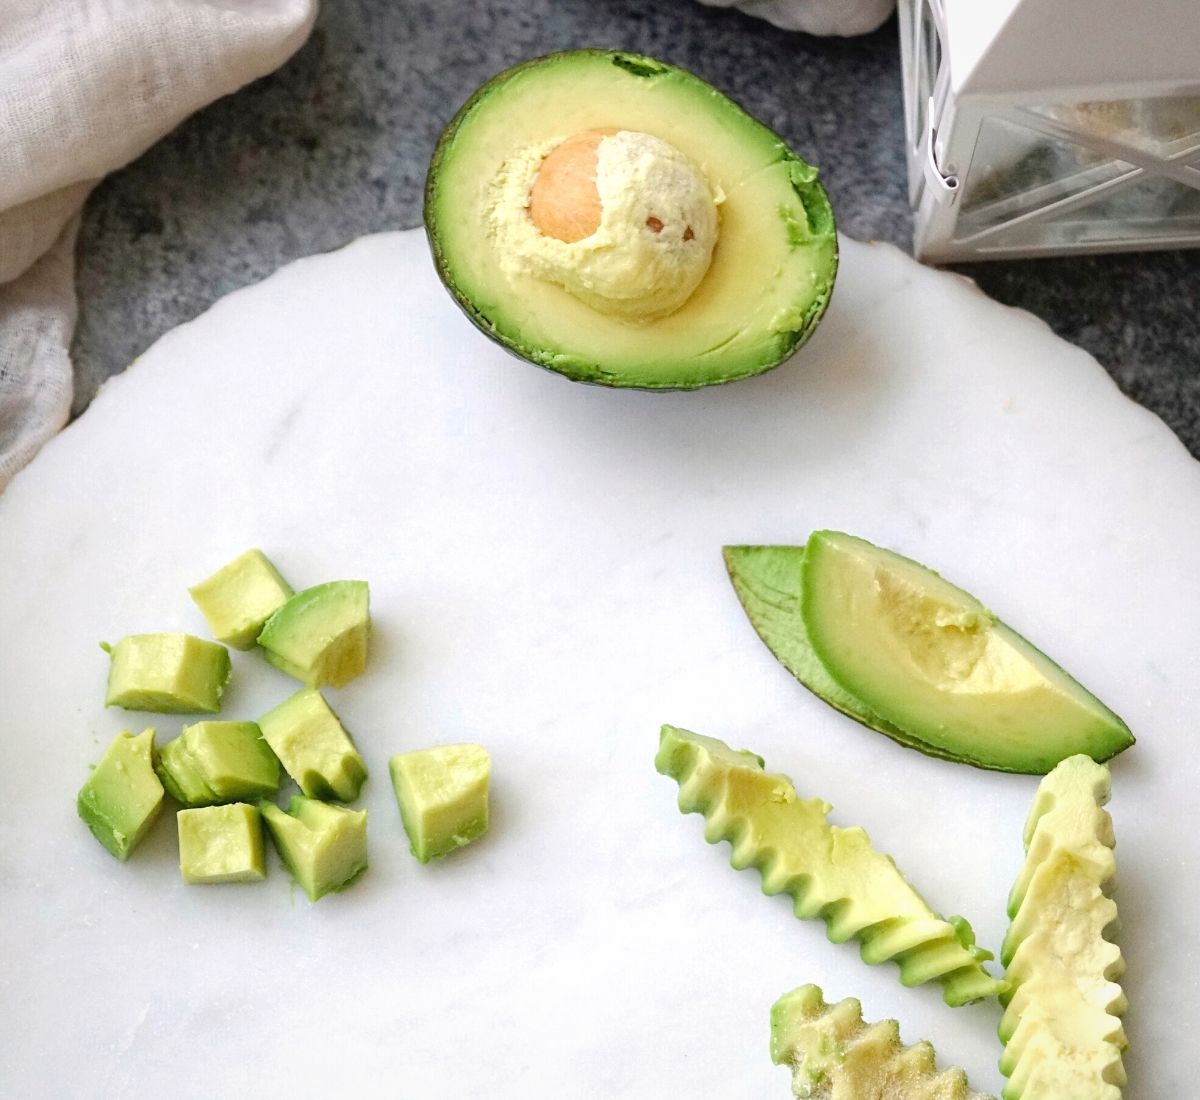 https://thrivingnest.com/wp-content/uploads/2021/10/avocado-for-baby-led-weaning-ways-to-serve.jpg